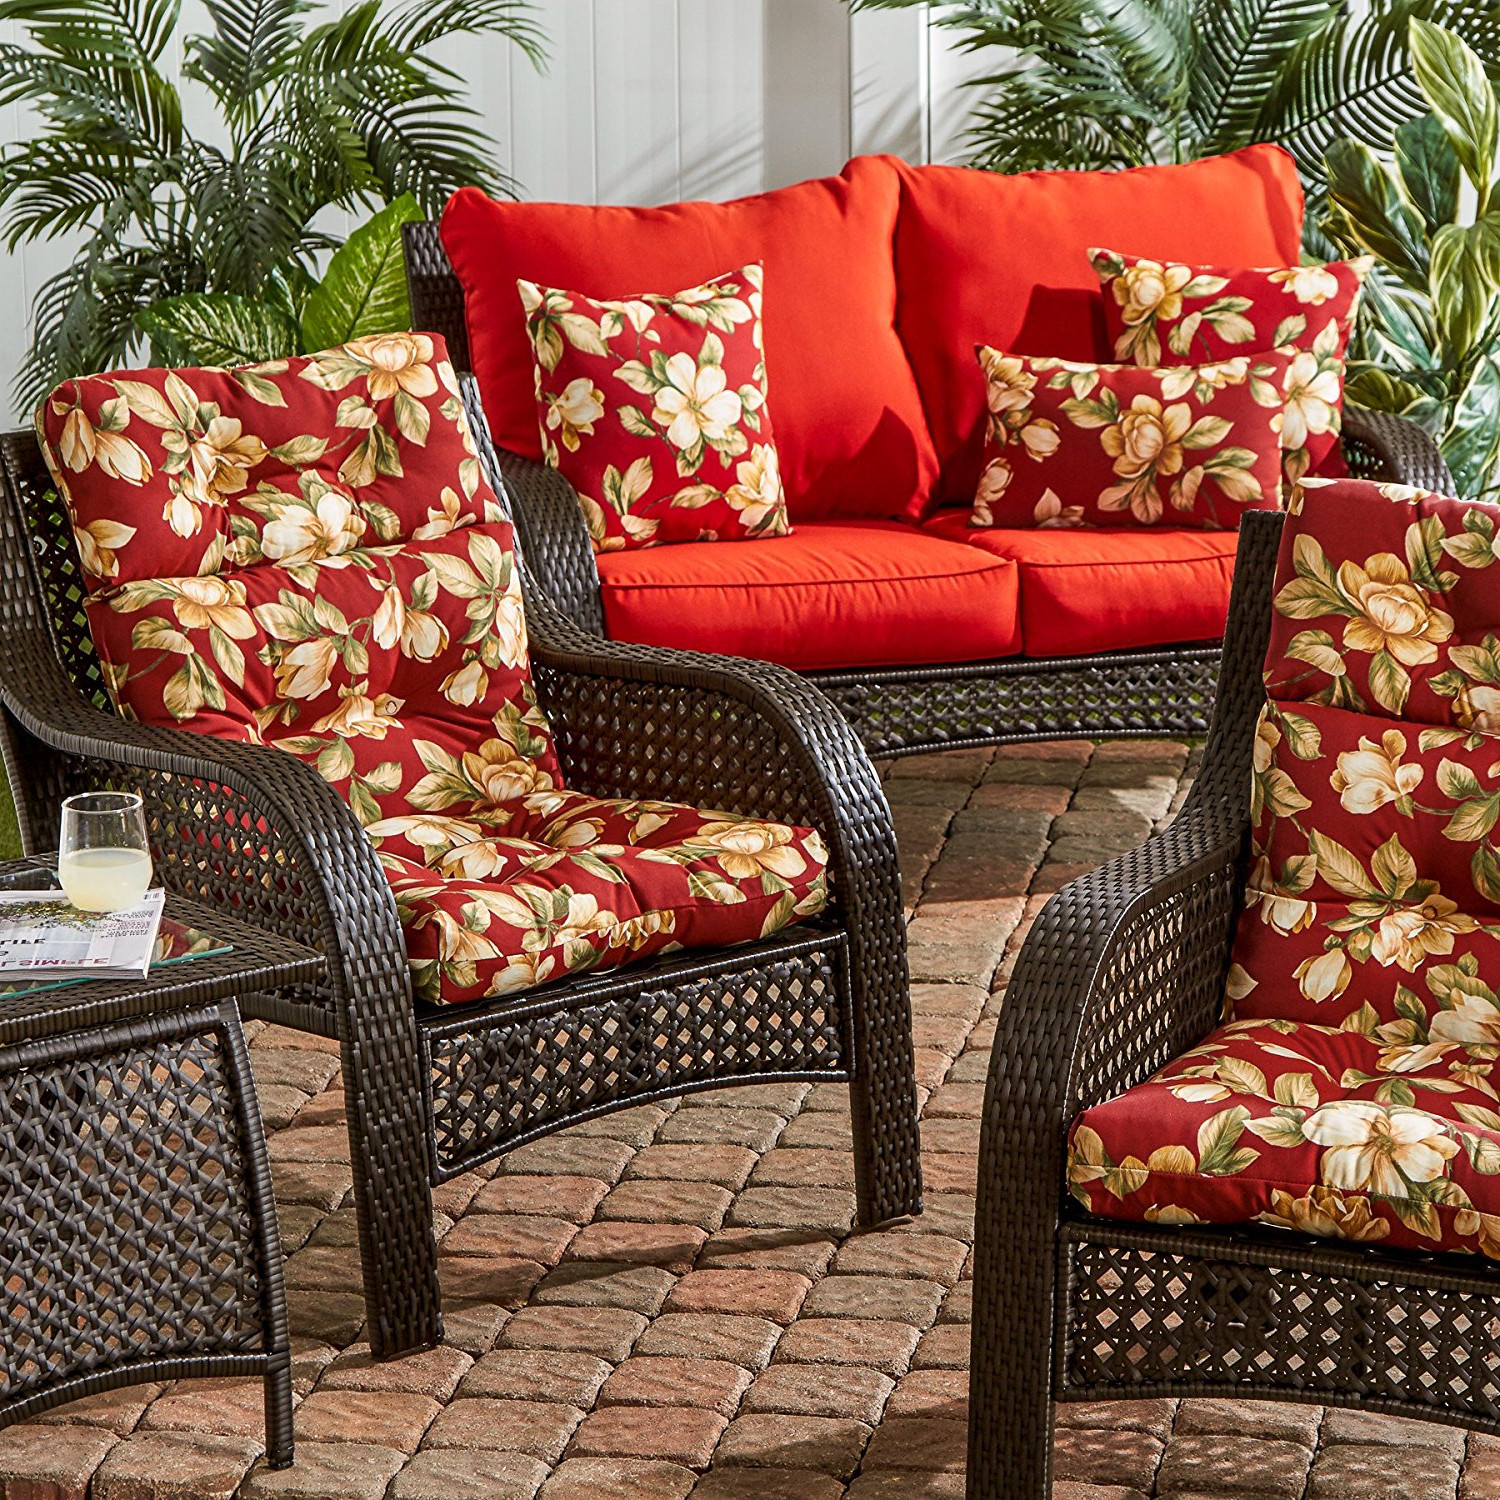 Deep Seat Cushions For Outdoor Furniture : Red Gray Blue Southwestern